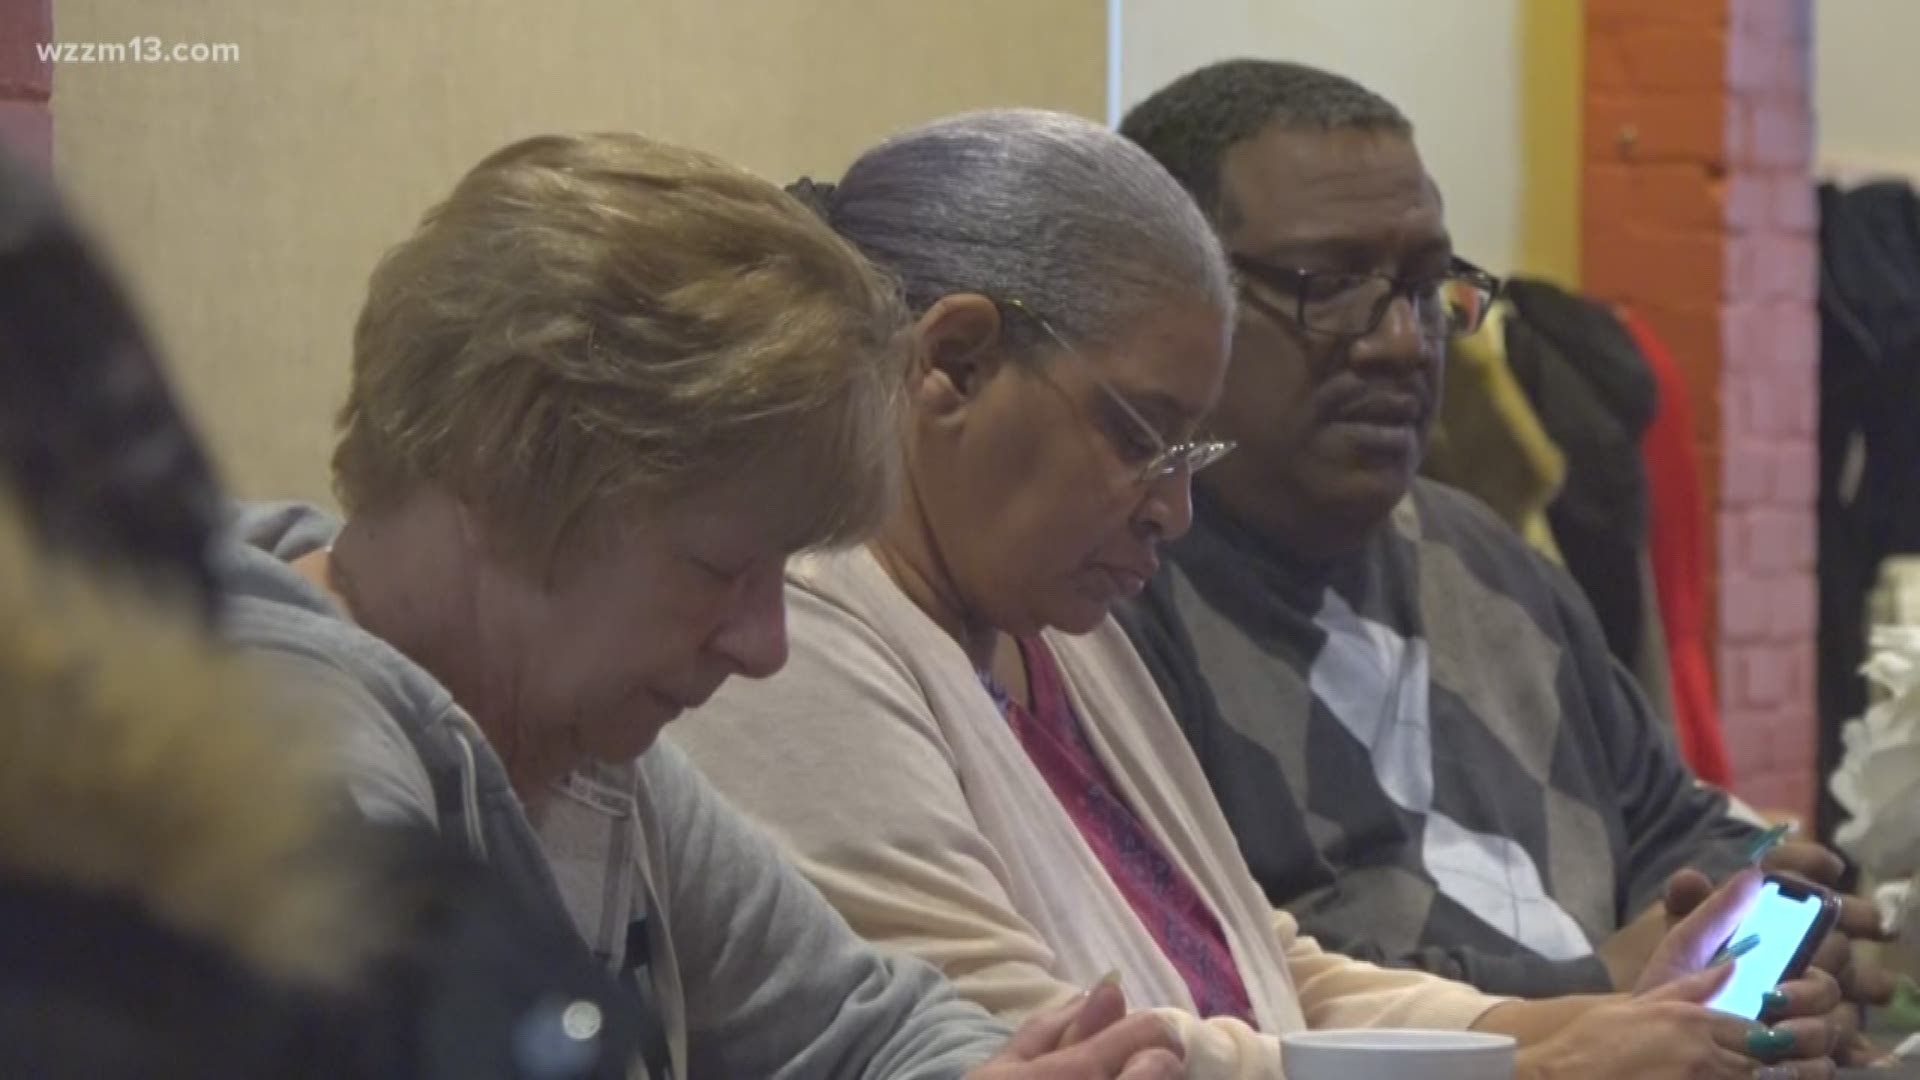 Mothers of children killed by gun violence hold planning meeting